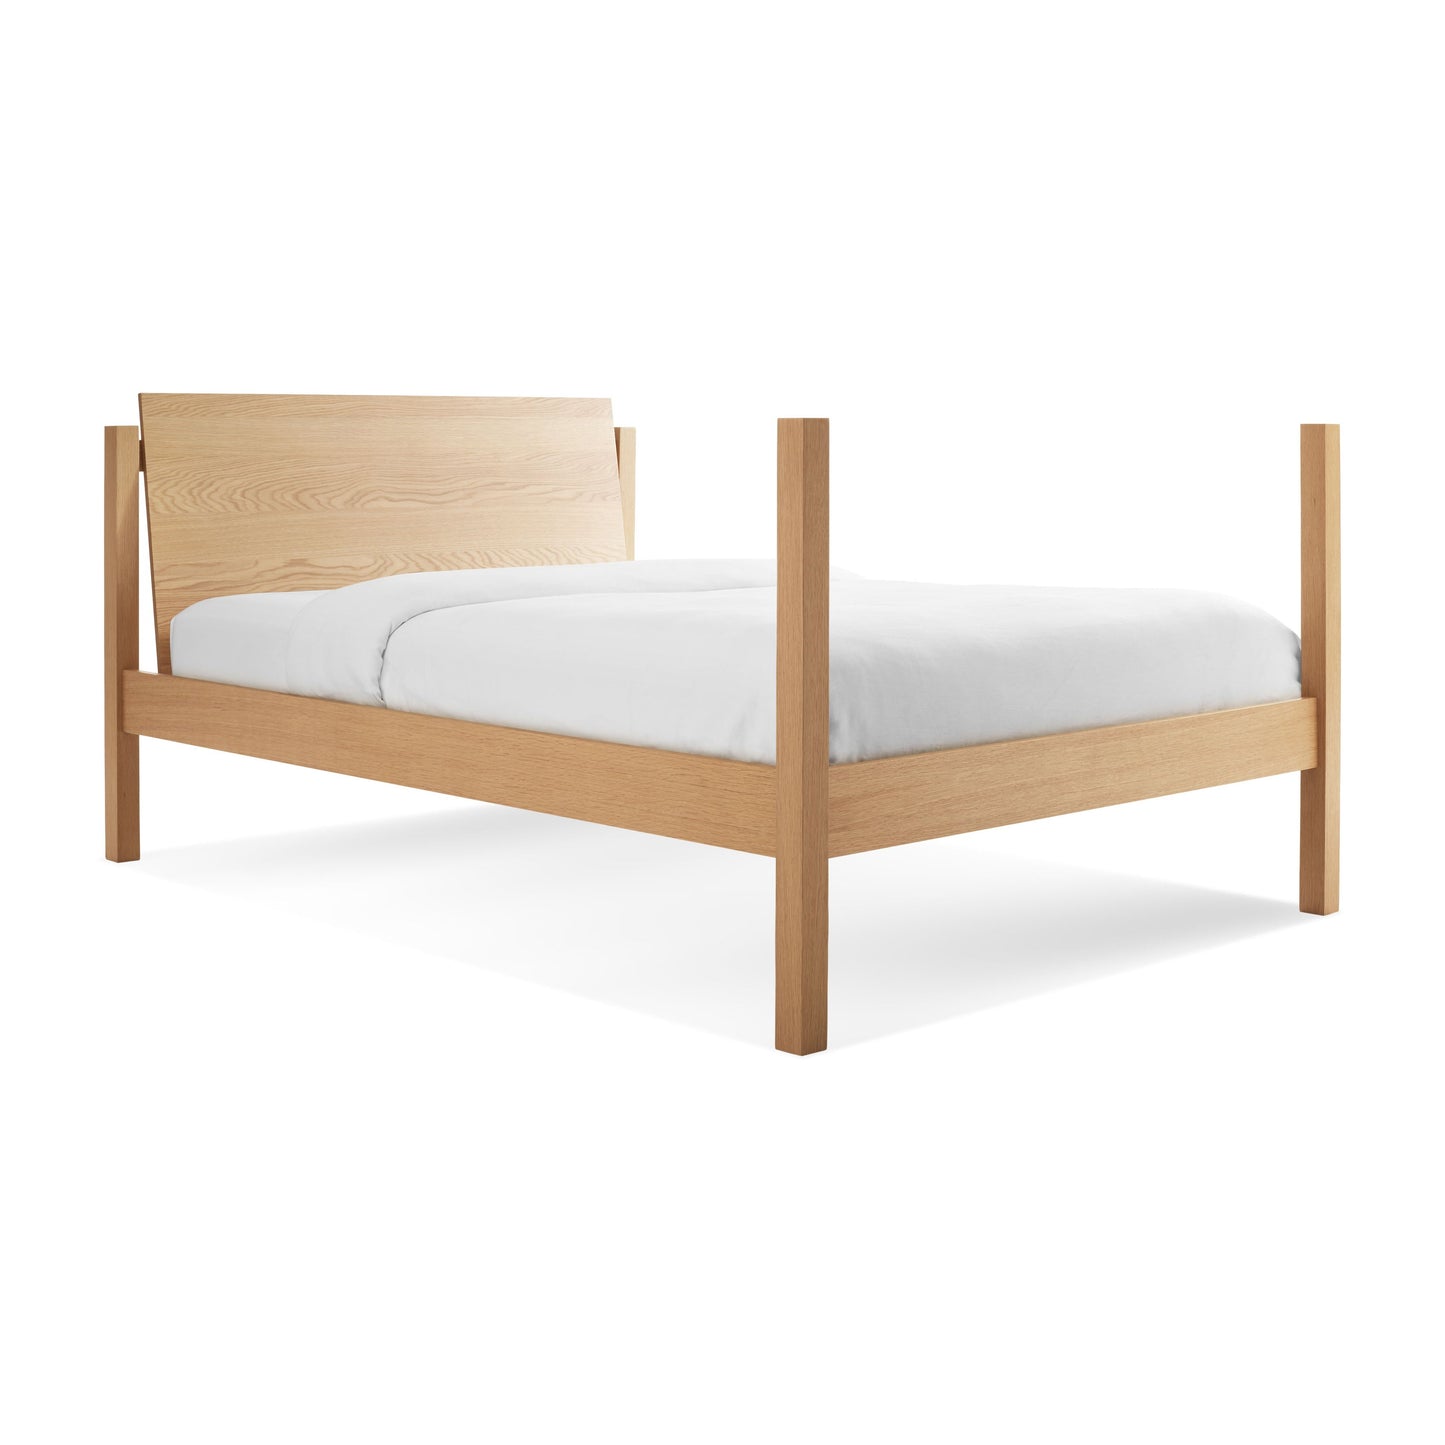 Post Up Bed